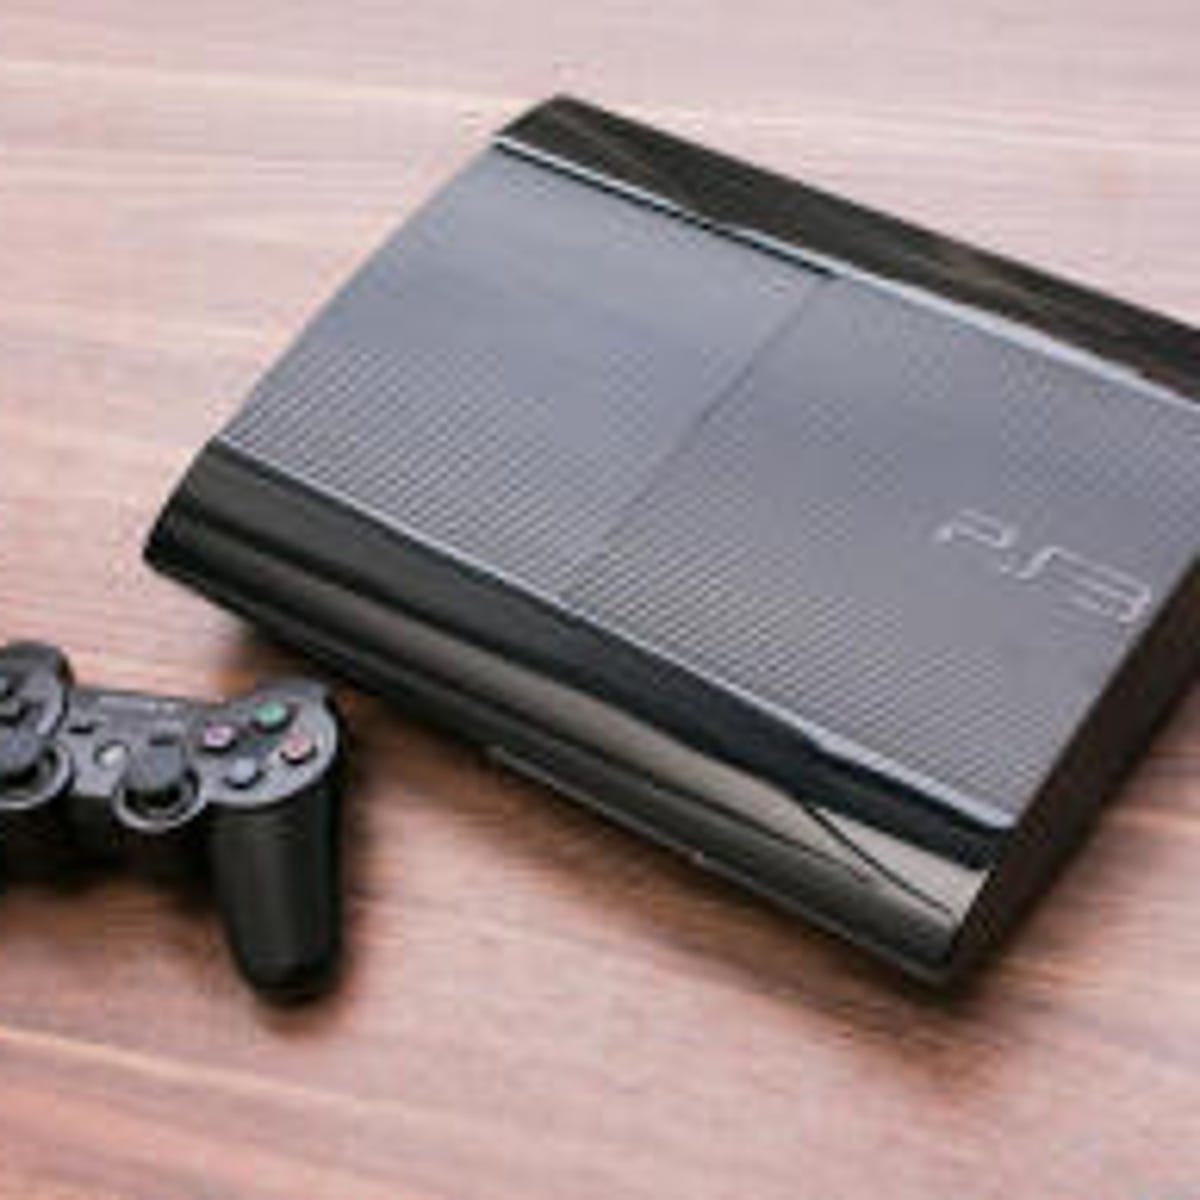 Enzovoorts zwaan Gehuurd Sony PlayStation 3 Super Slim (500GB) review: Sony's old console is still a  contender - CNET